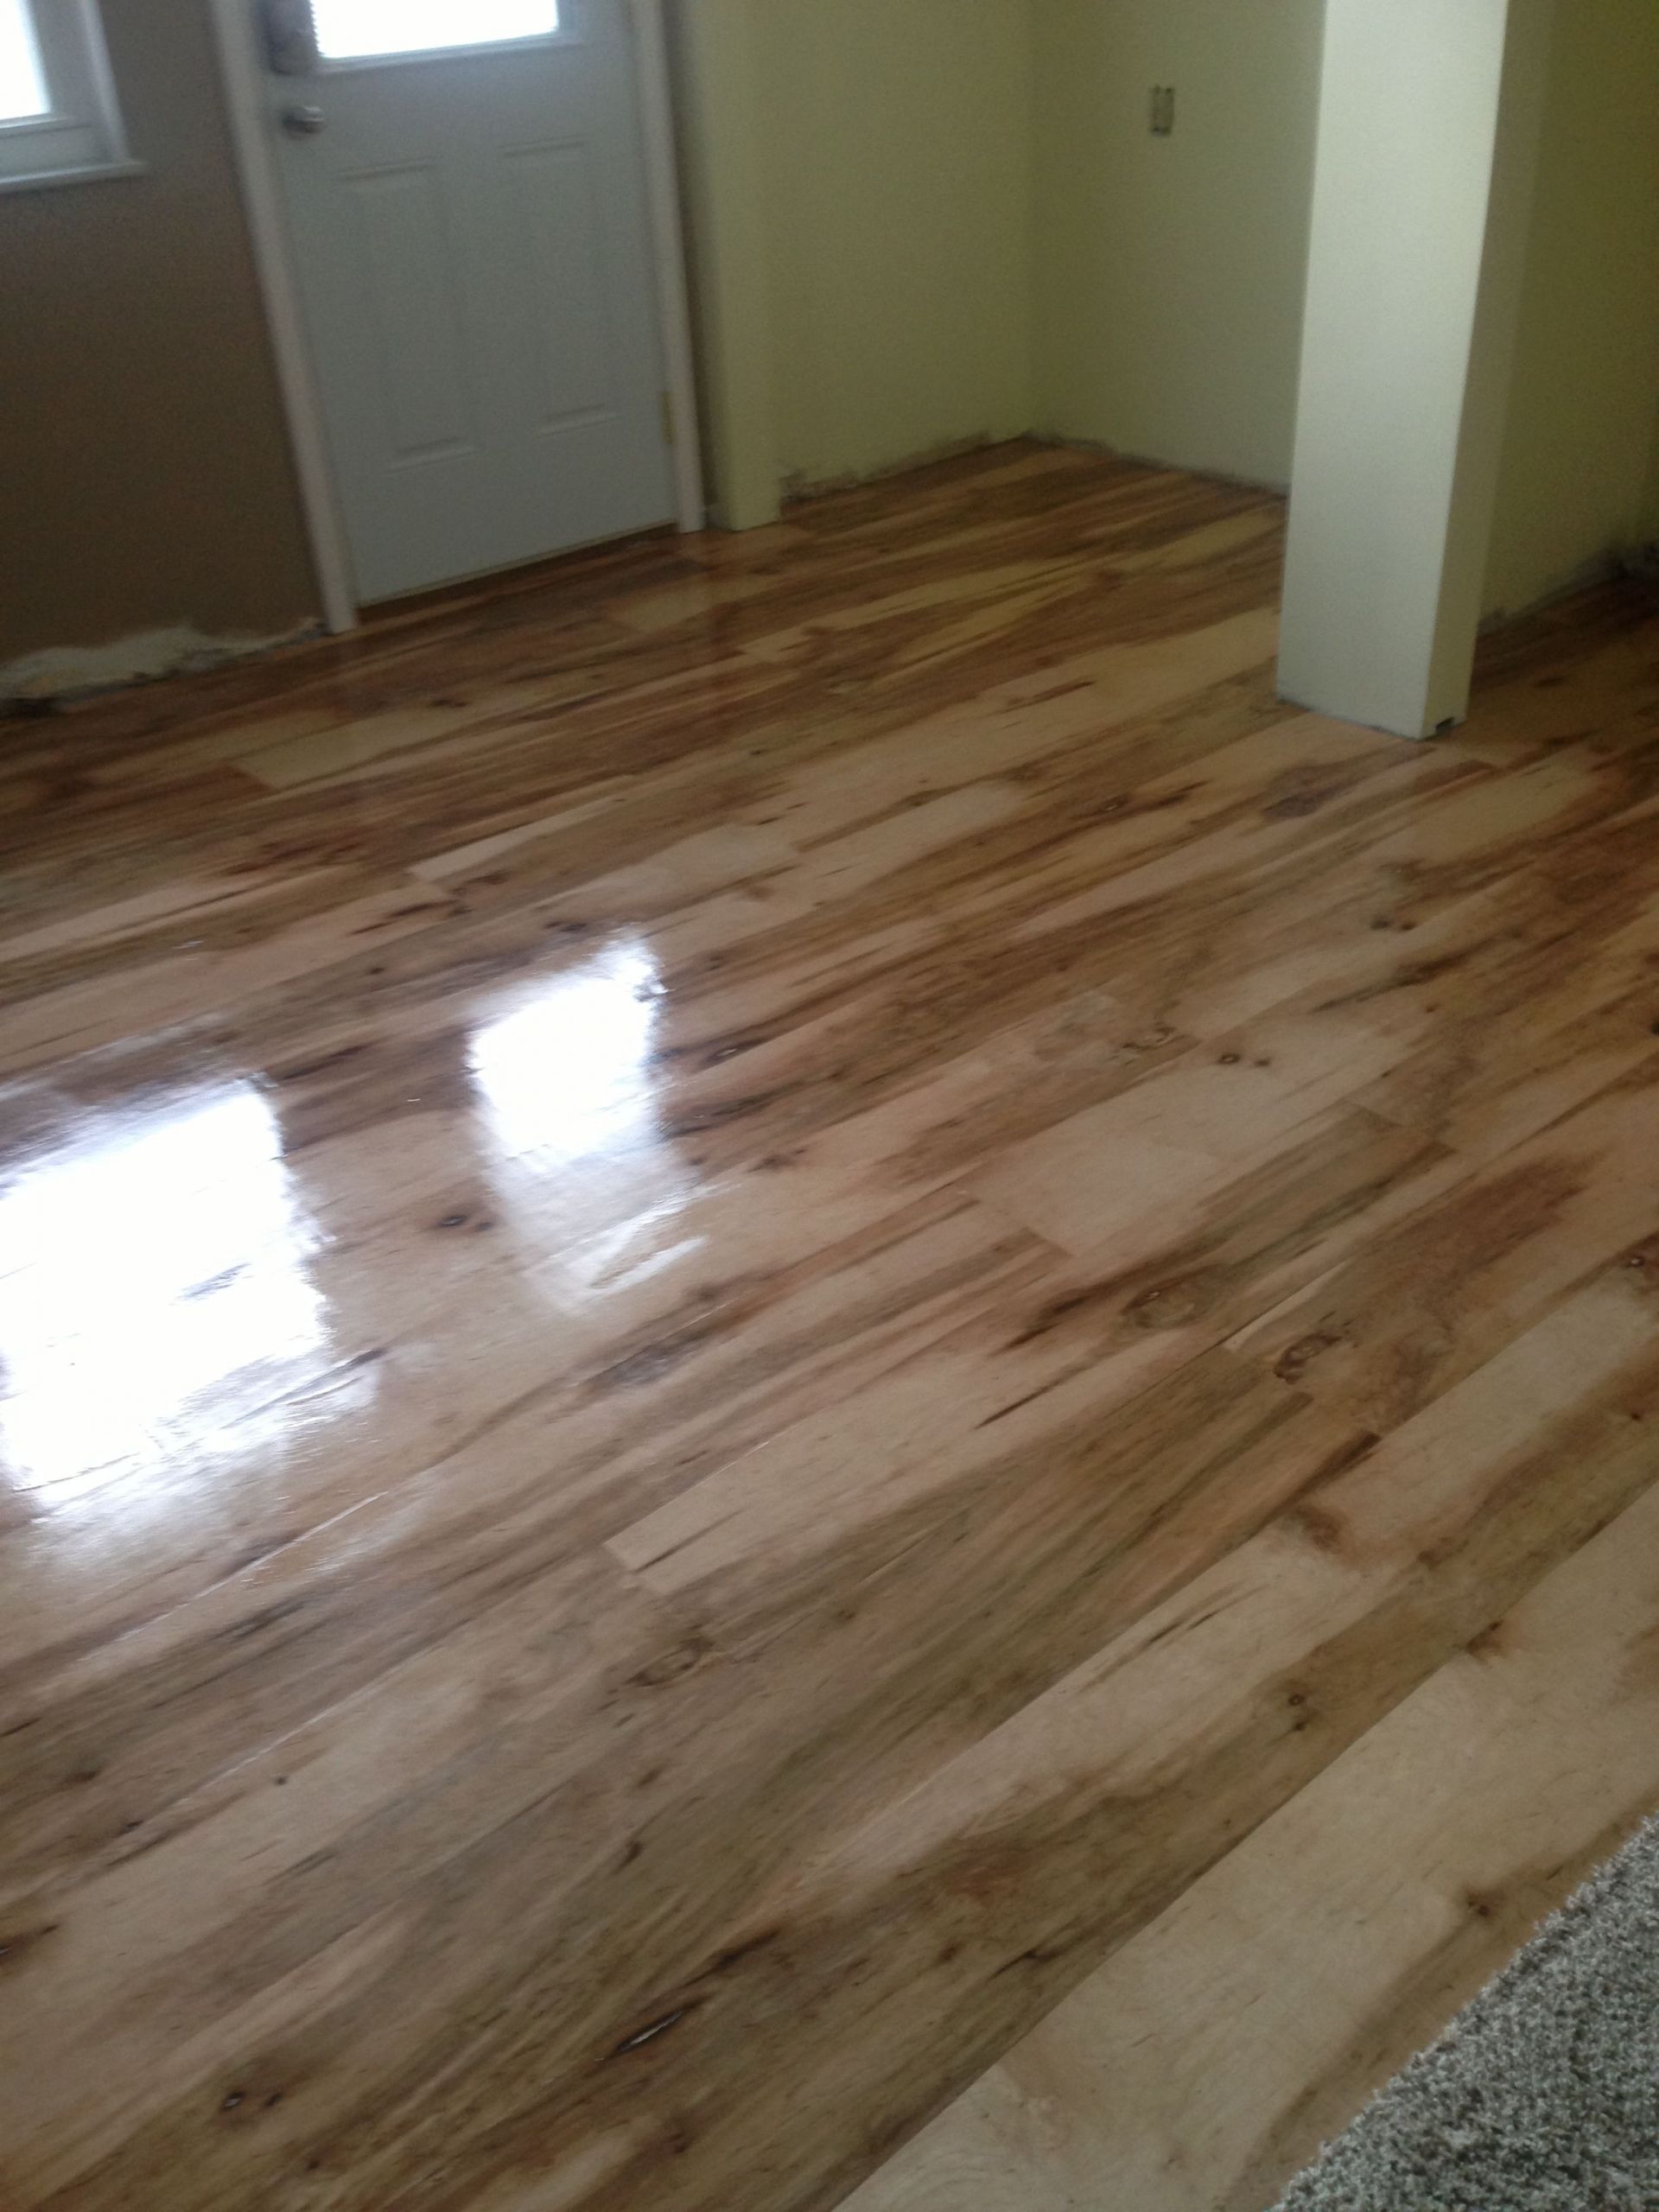 DIY Plywood Floors
 The final finish of the plywood floor love only cost